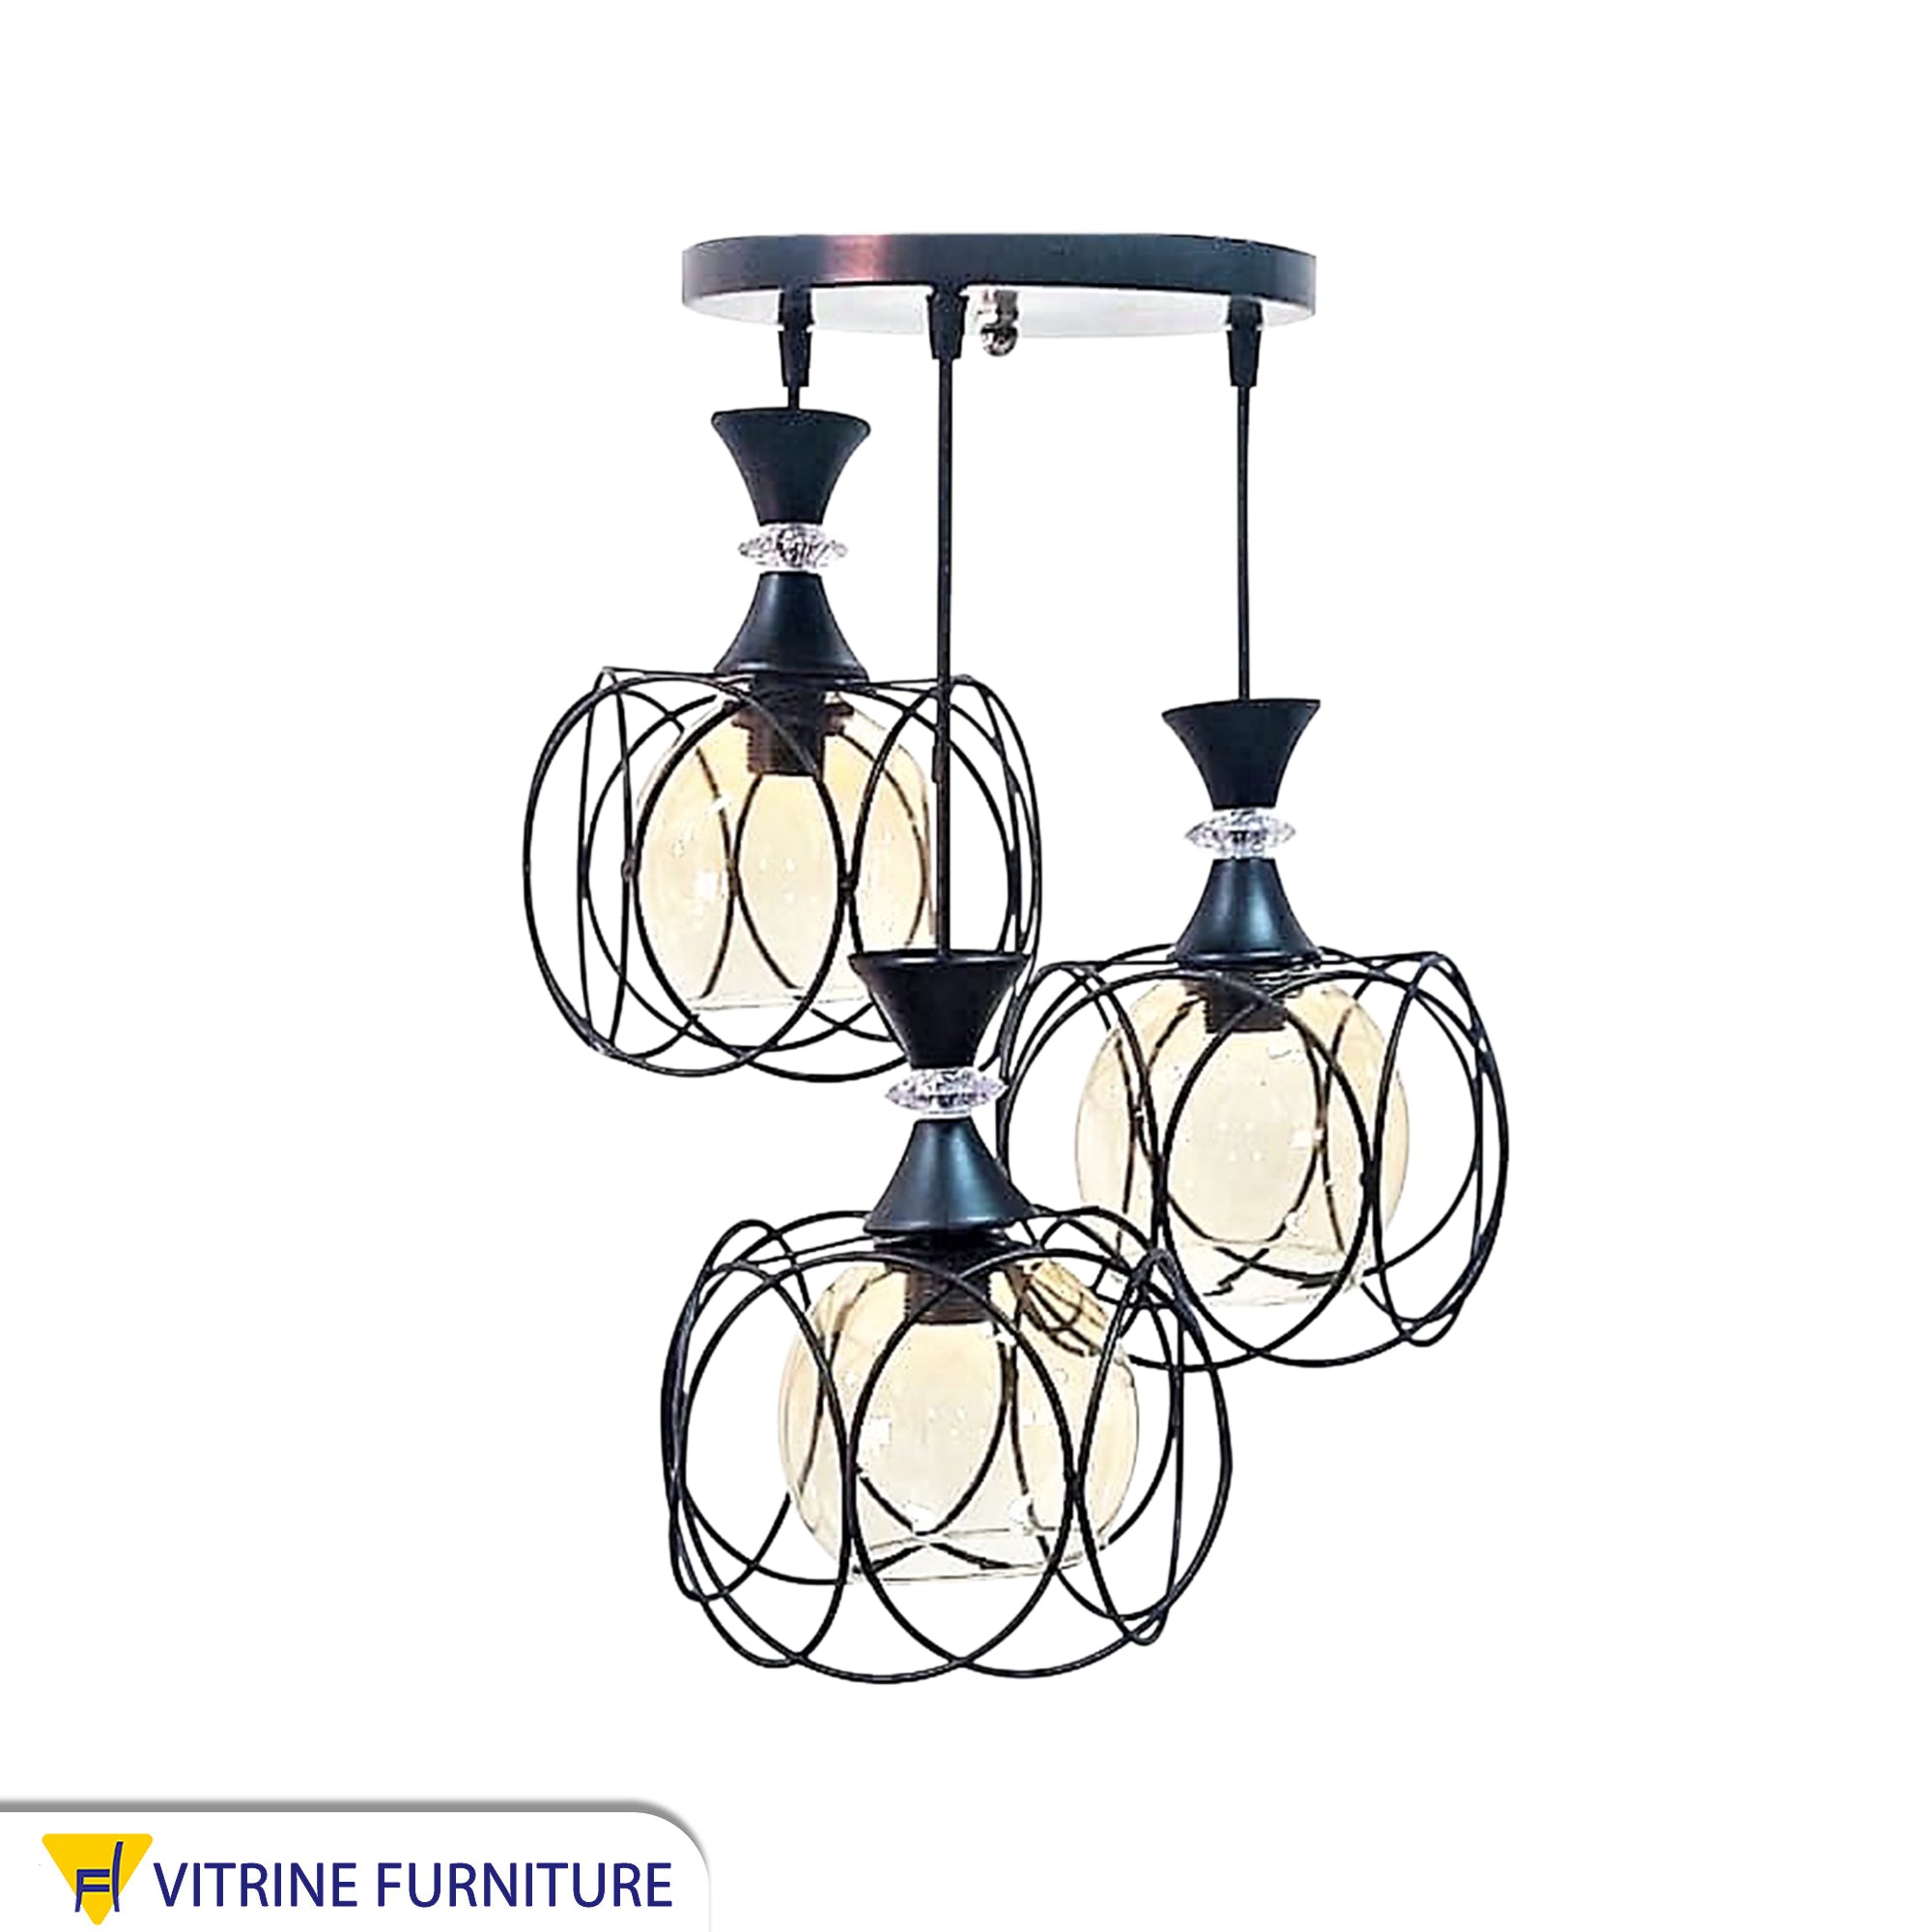 Three Pendant ceiling lamps with a modern design